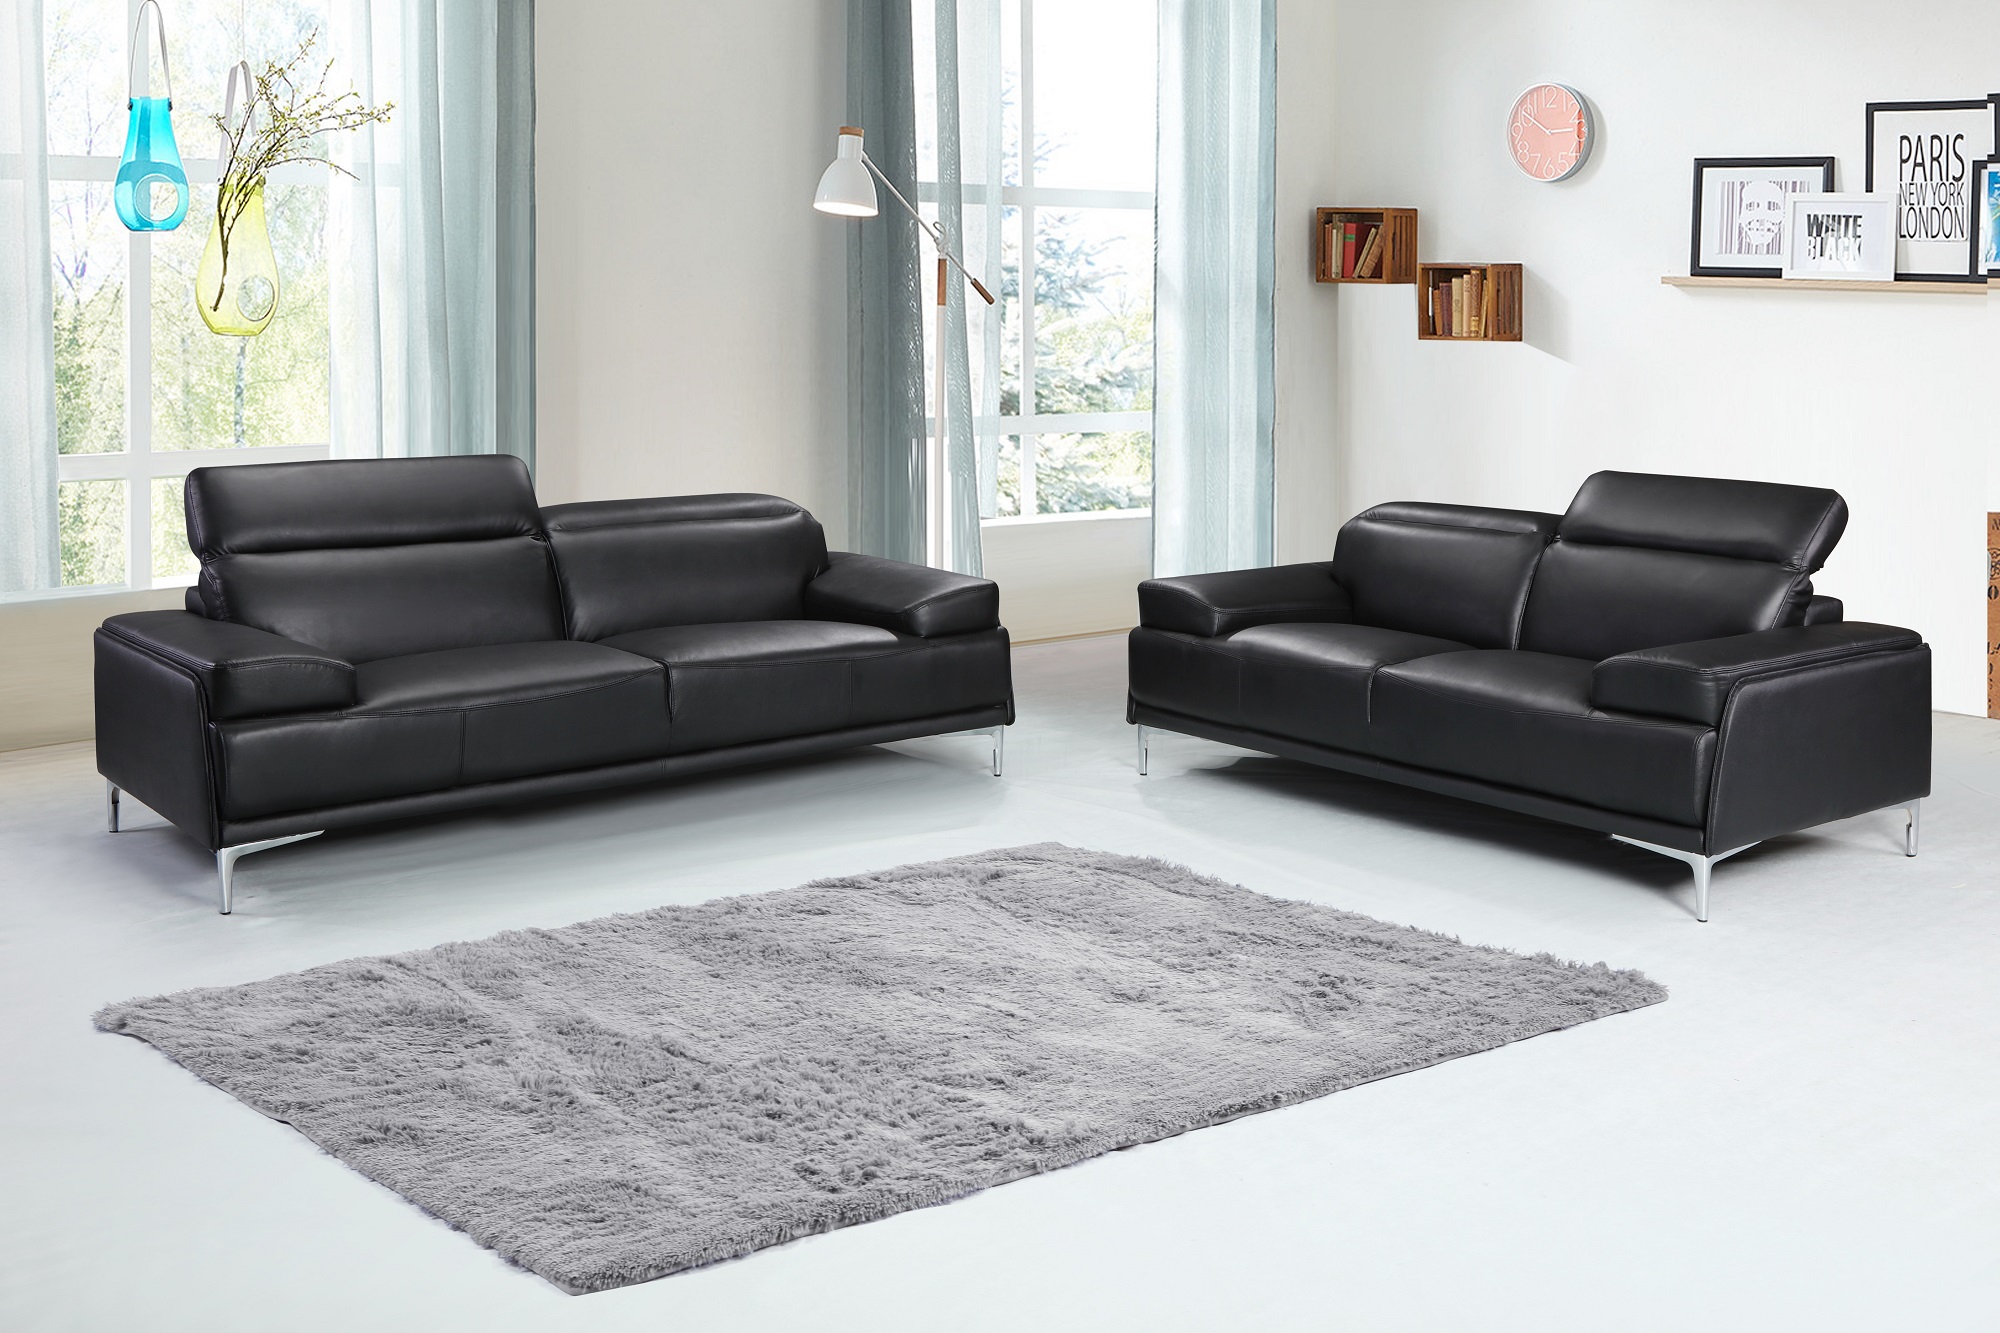 Modern Living Room With Black Leather Sofa - Room Living Leather Sofa ...